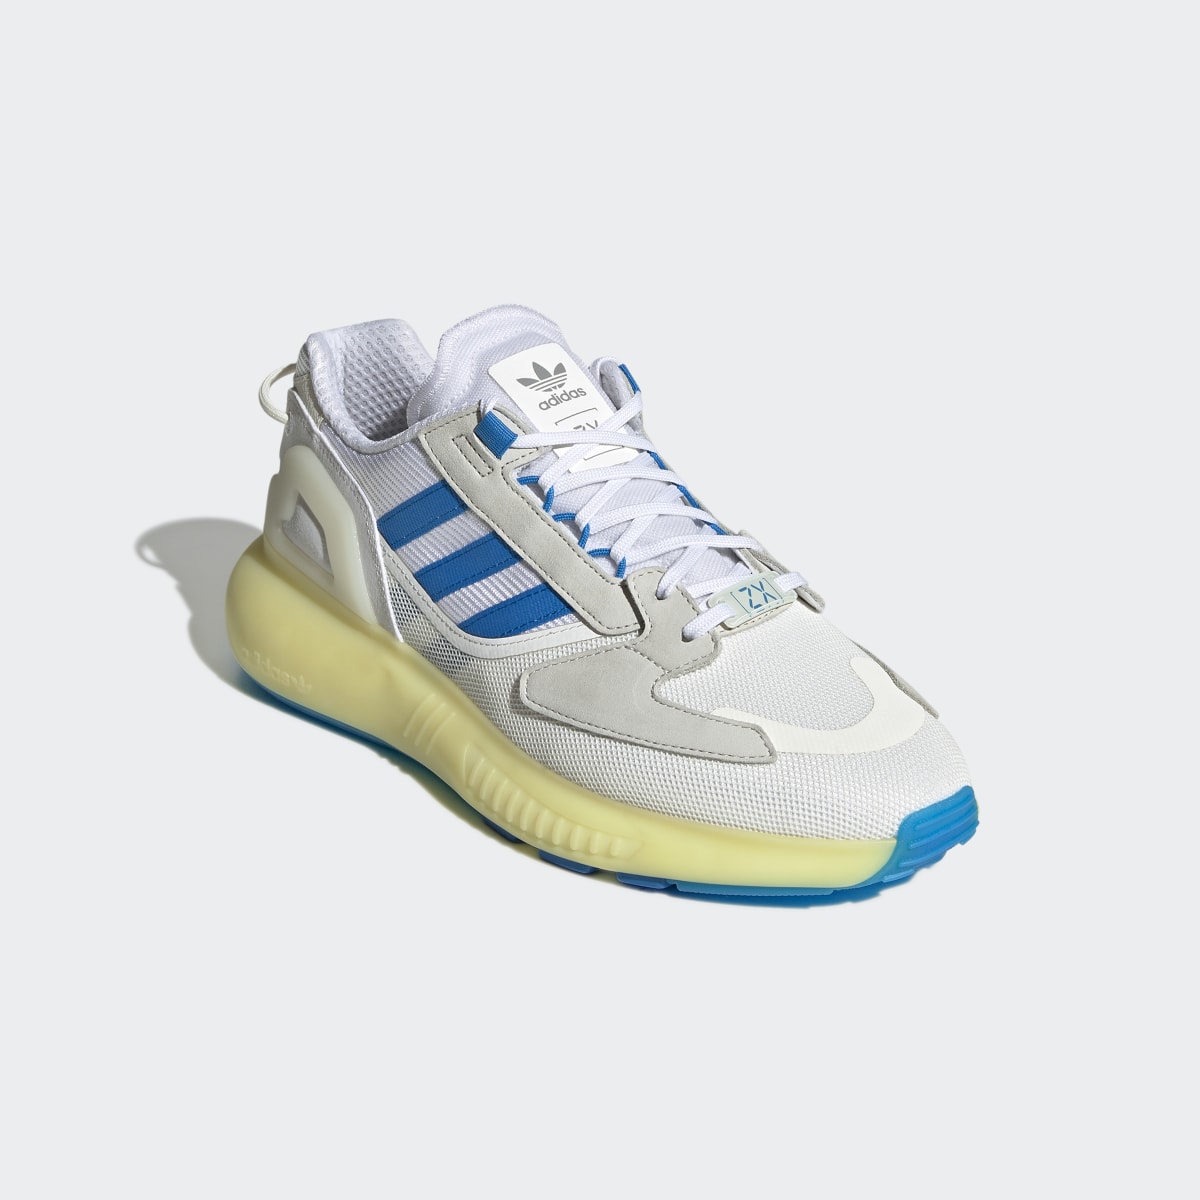 Adidas ZX 5K BOOST Shoes. 5